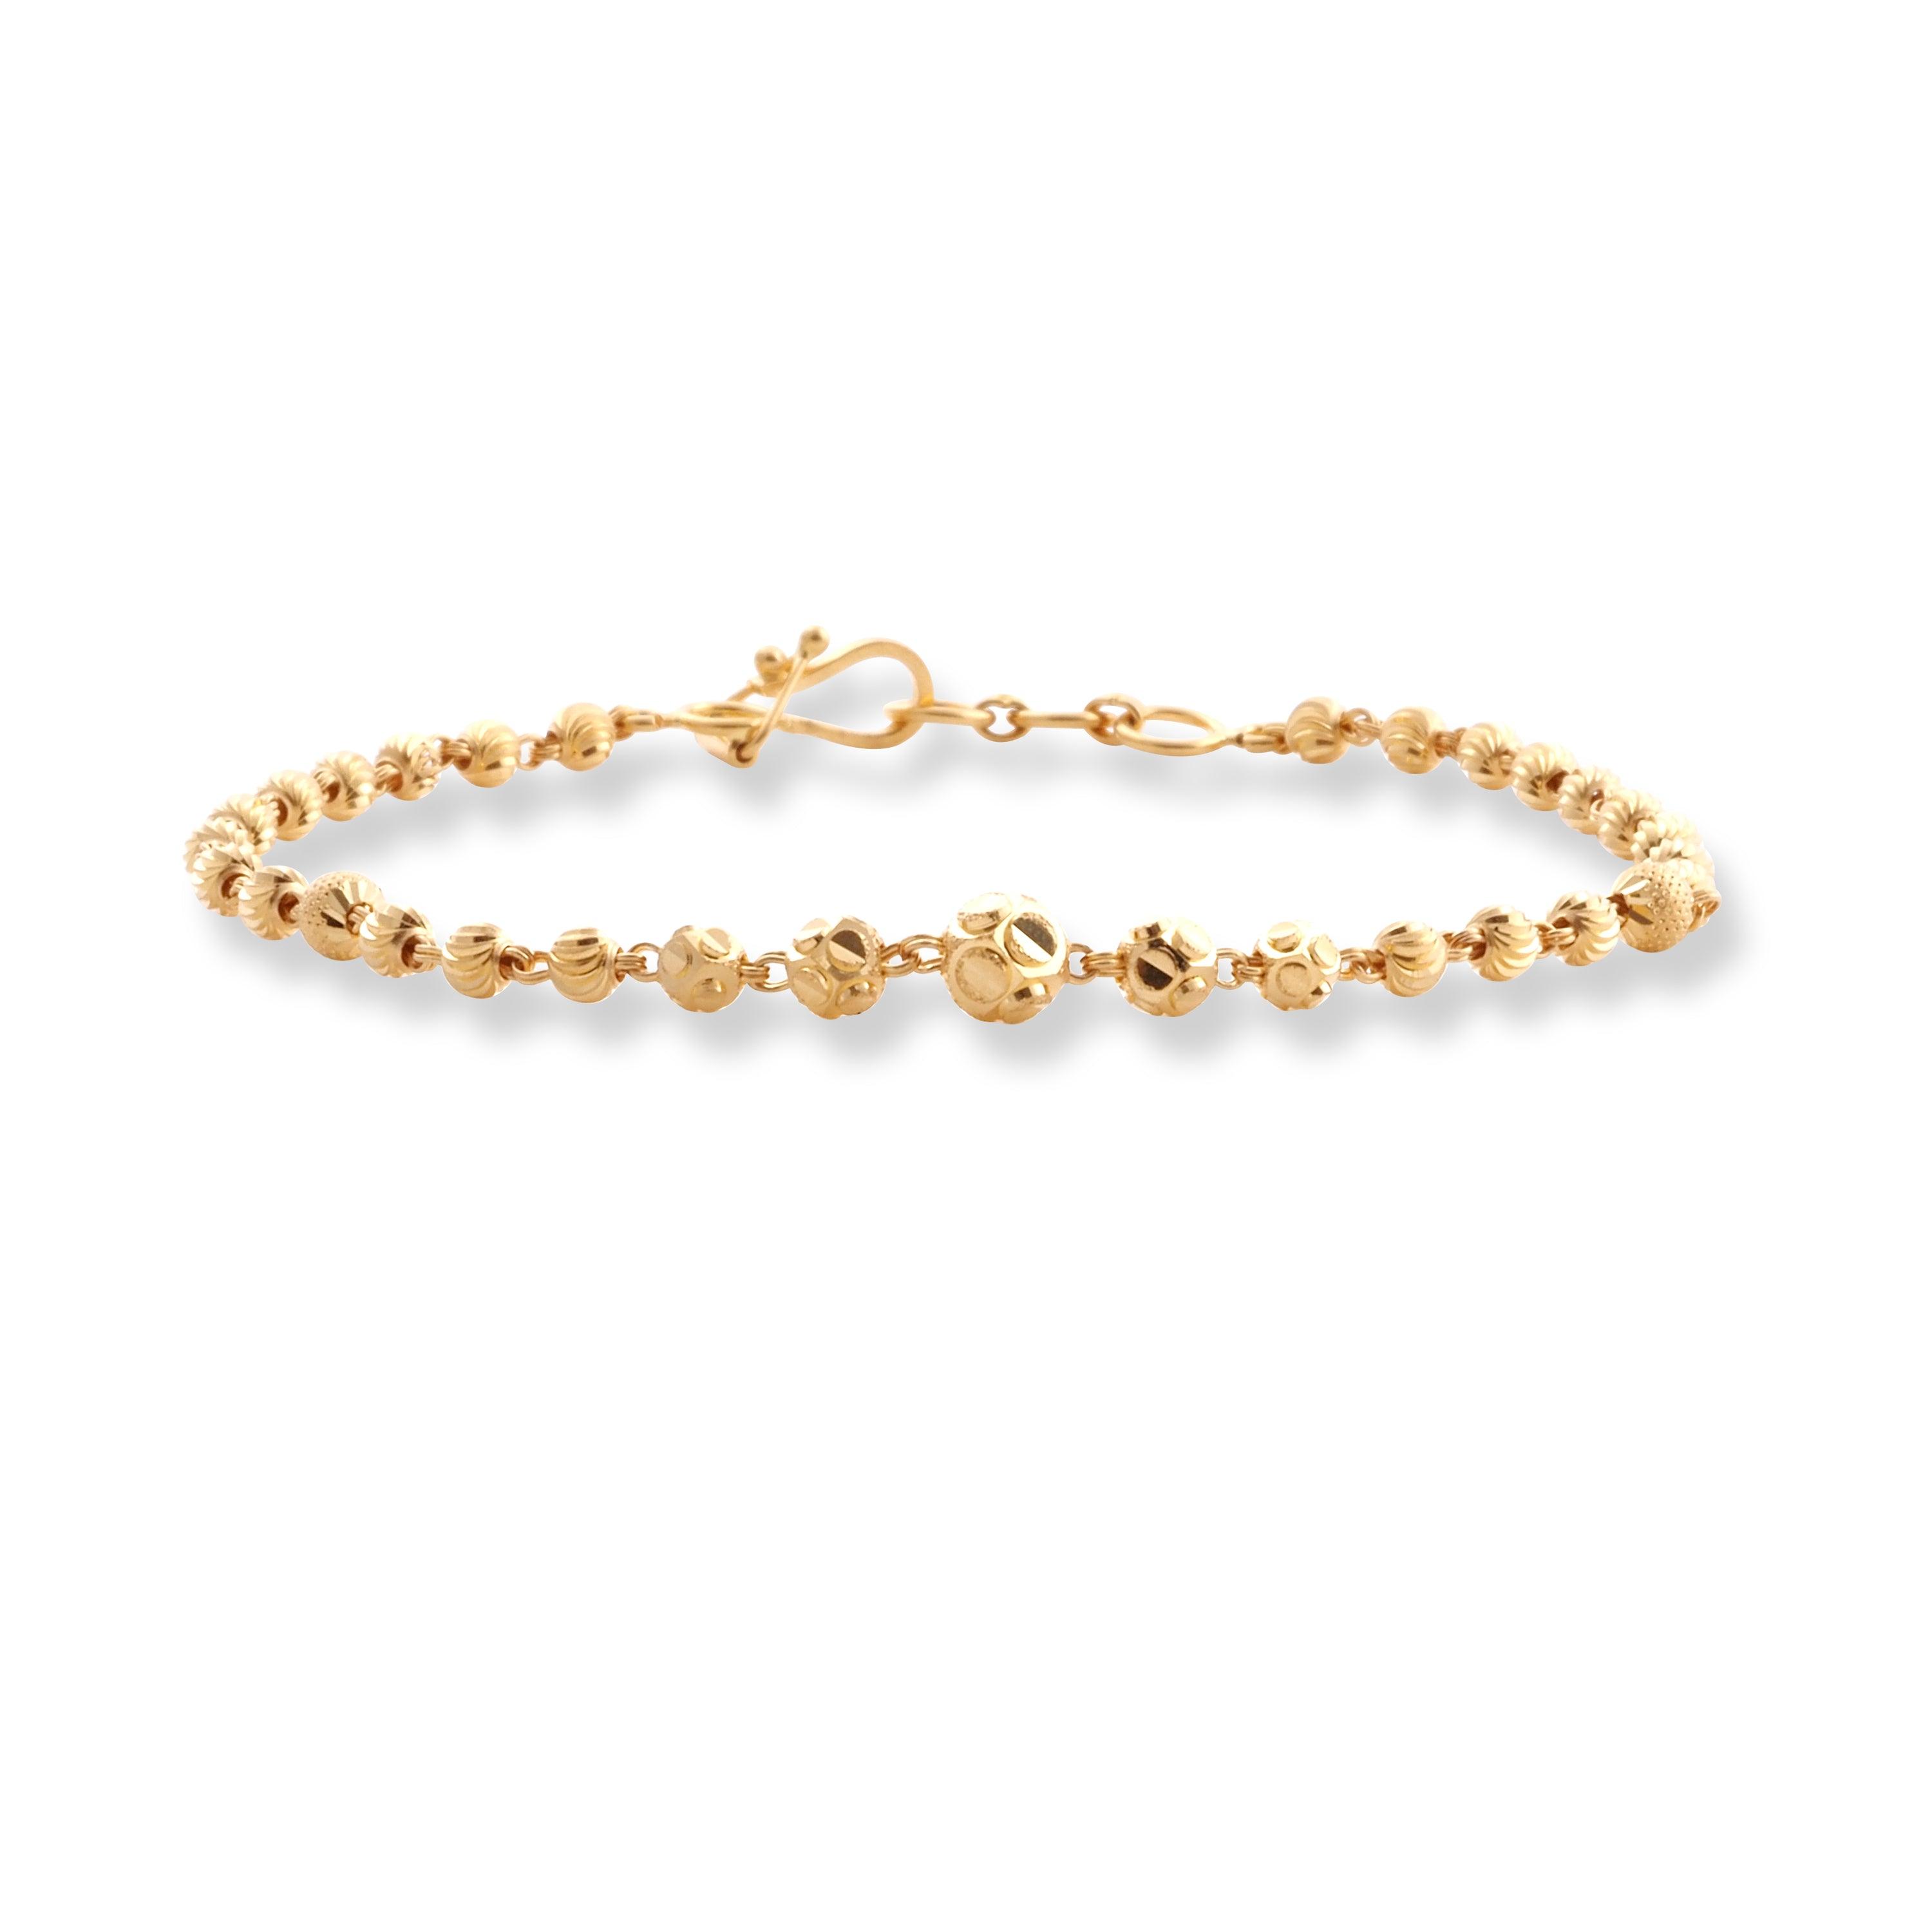 22ct Gold Bracelet with Diamond Cut Beads and Hook Clasp LBR-8514 - Minar Jewellers